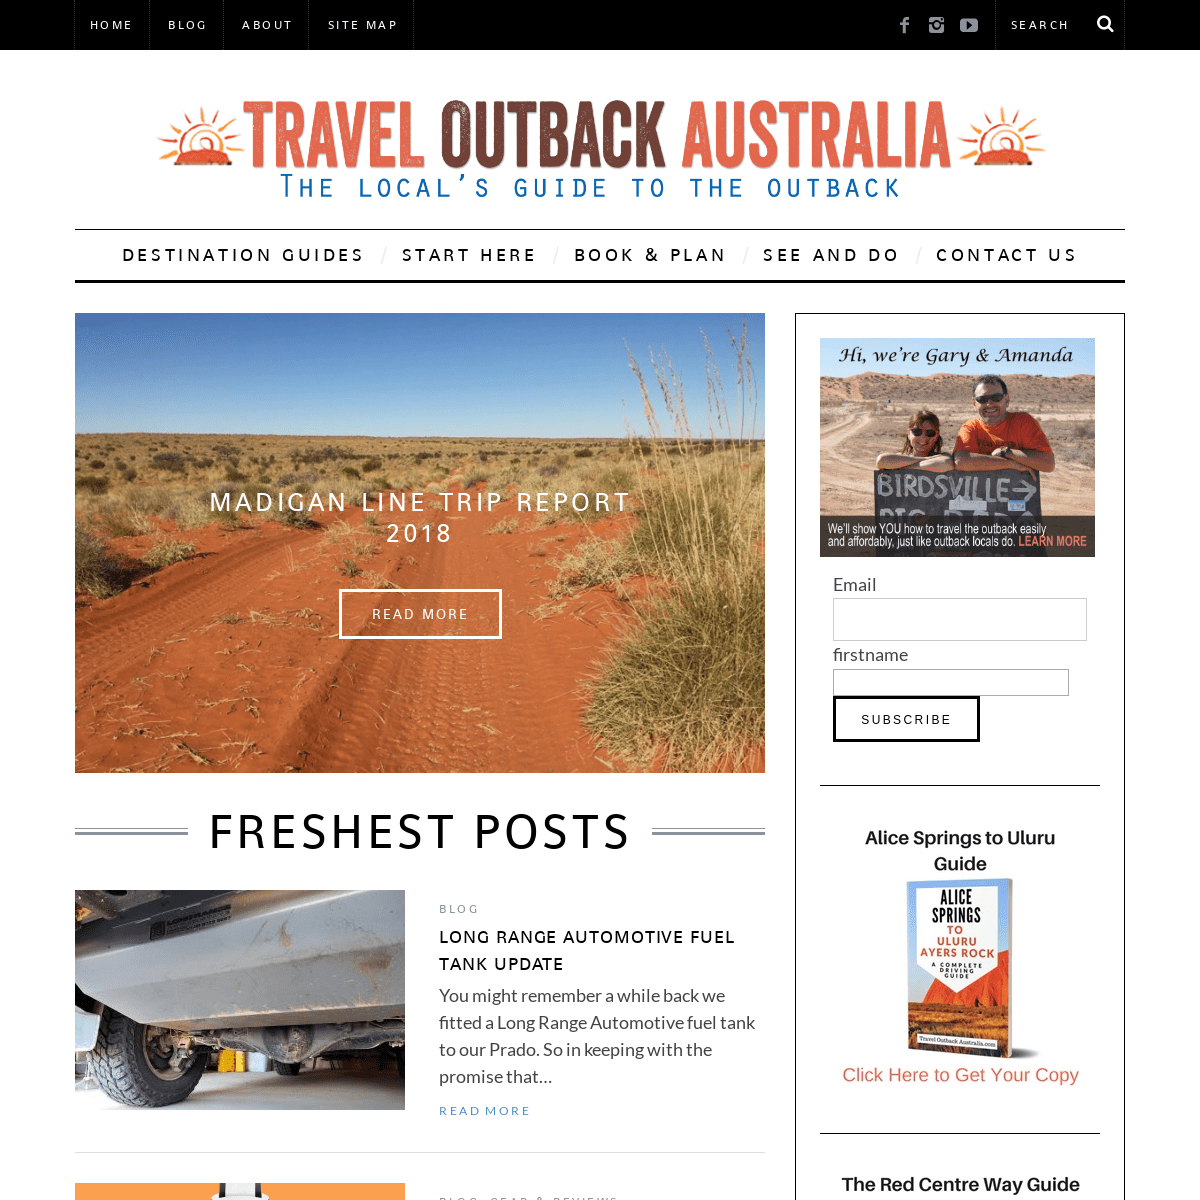 Travel Guide to the Australian Outback - Travel Outback Australia